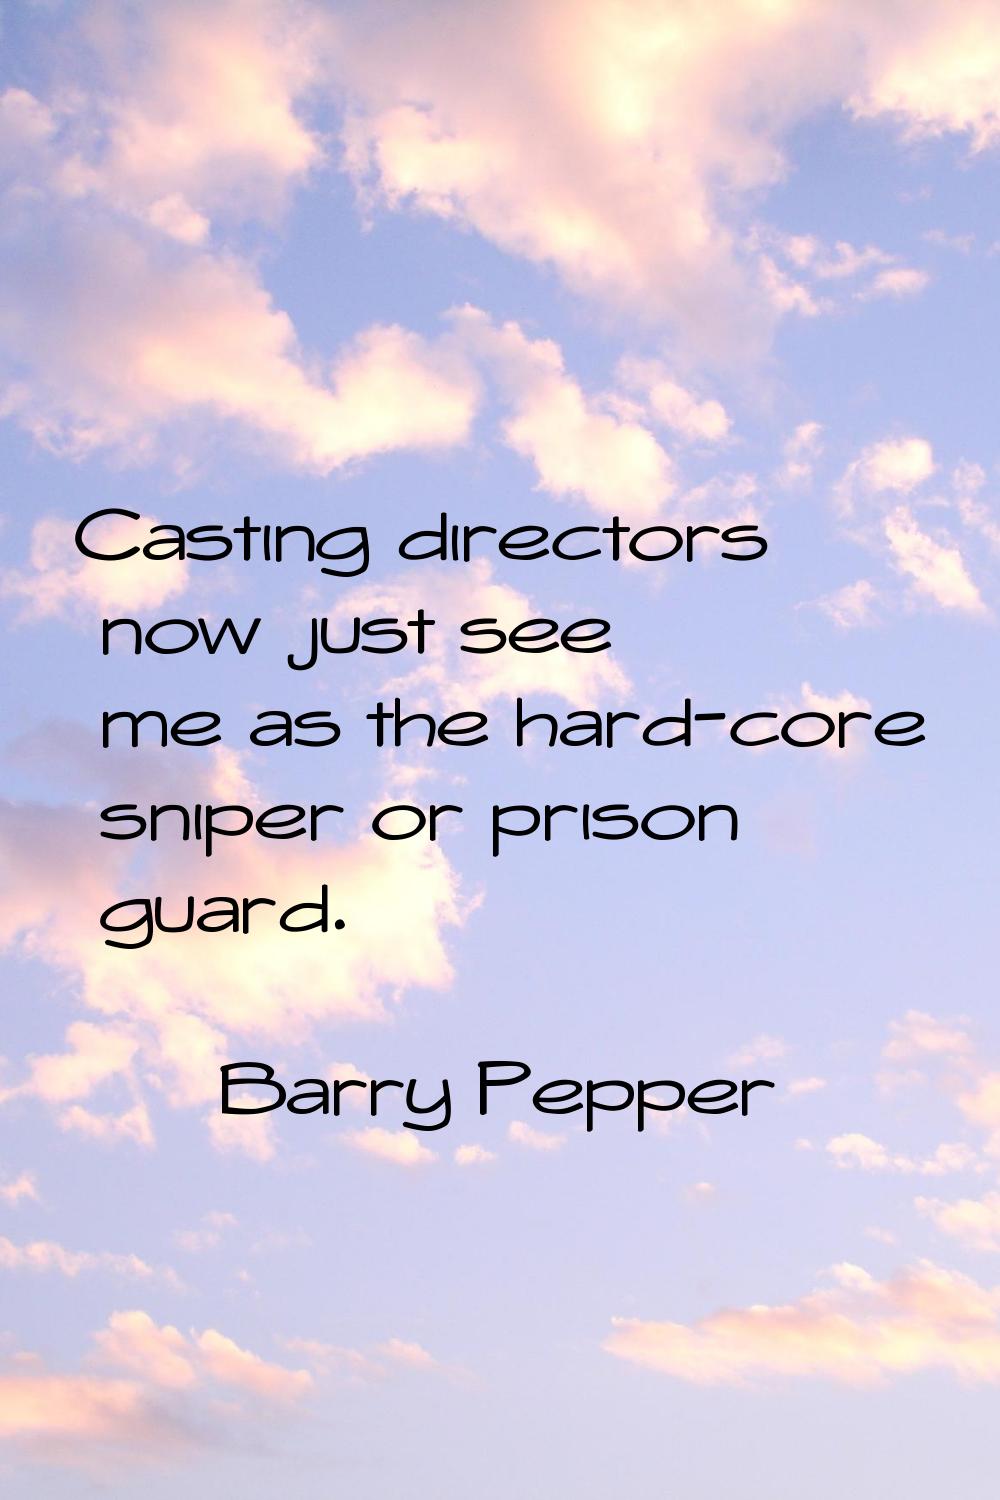 Casting directors now just see me as the hard-core sniper or prison guard.